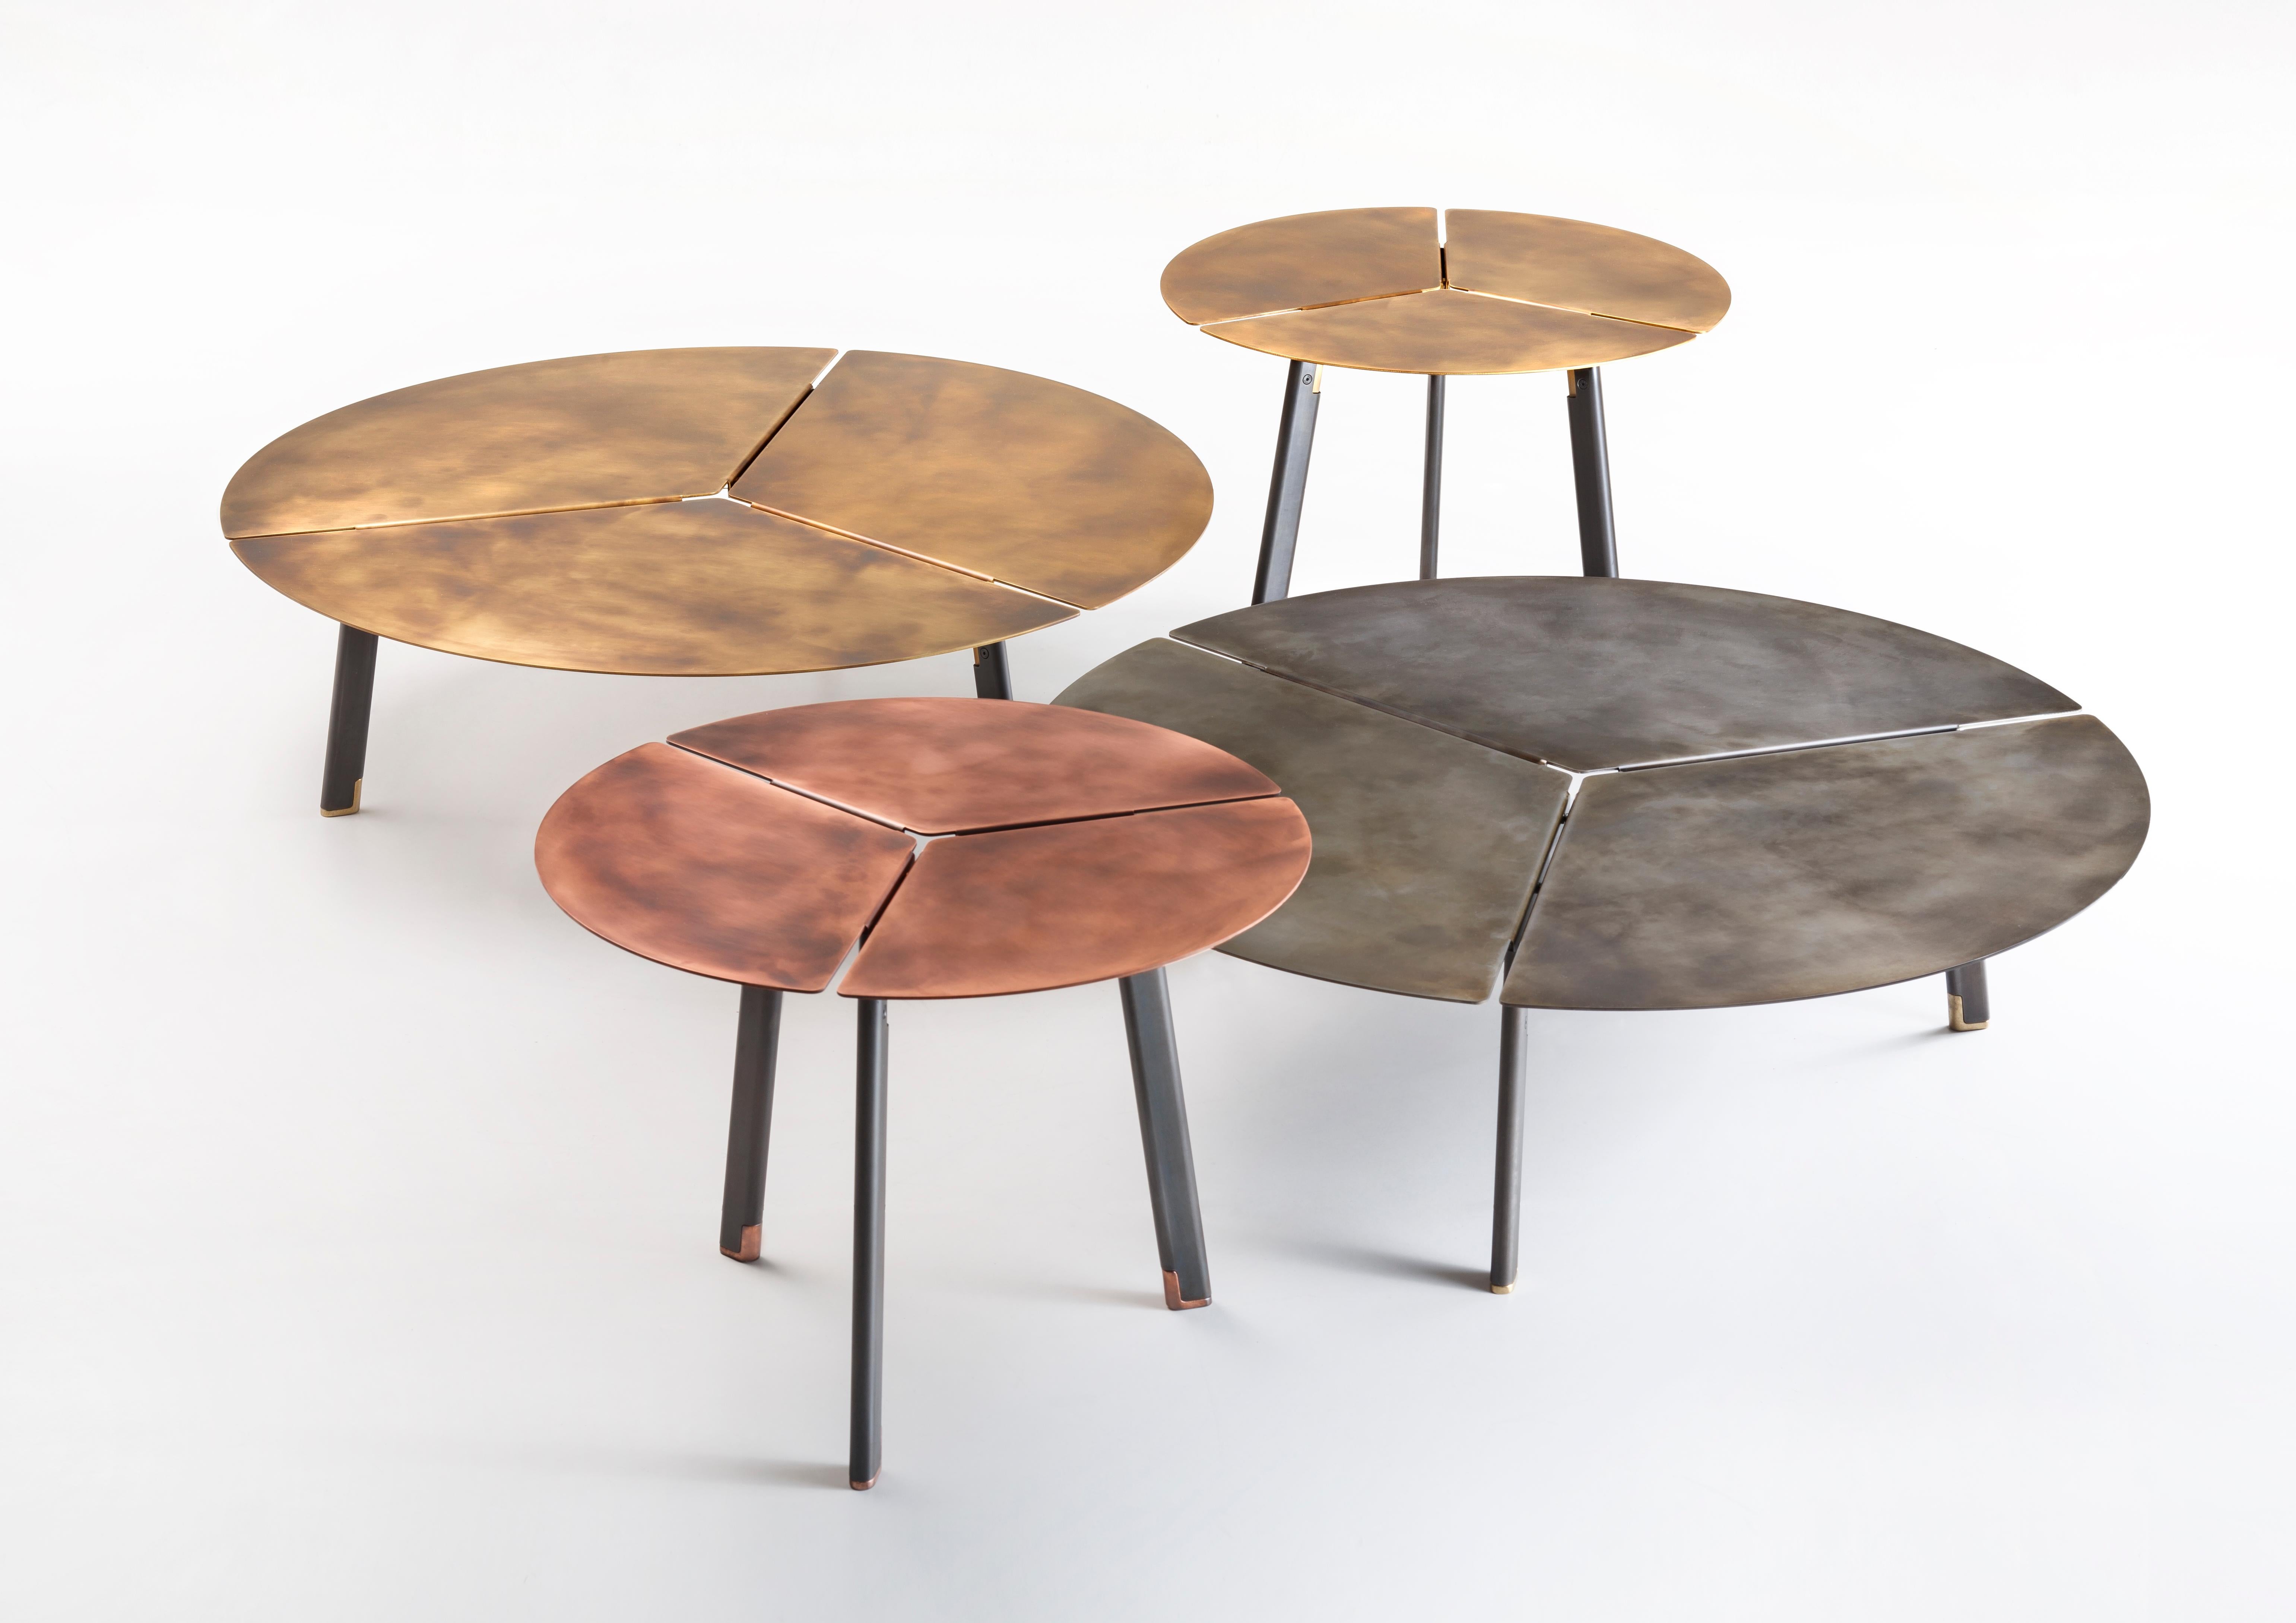 Three wedges, or three petals, open to create a circular table top, held together by the supporting frame of the legs. Simple yet effective design emphasizes the geometric nature of the design, highlighting the expressivity of the material, ennobled